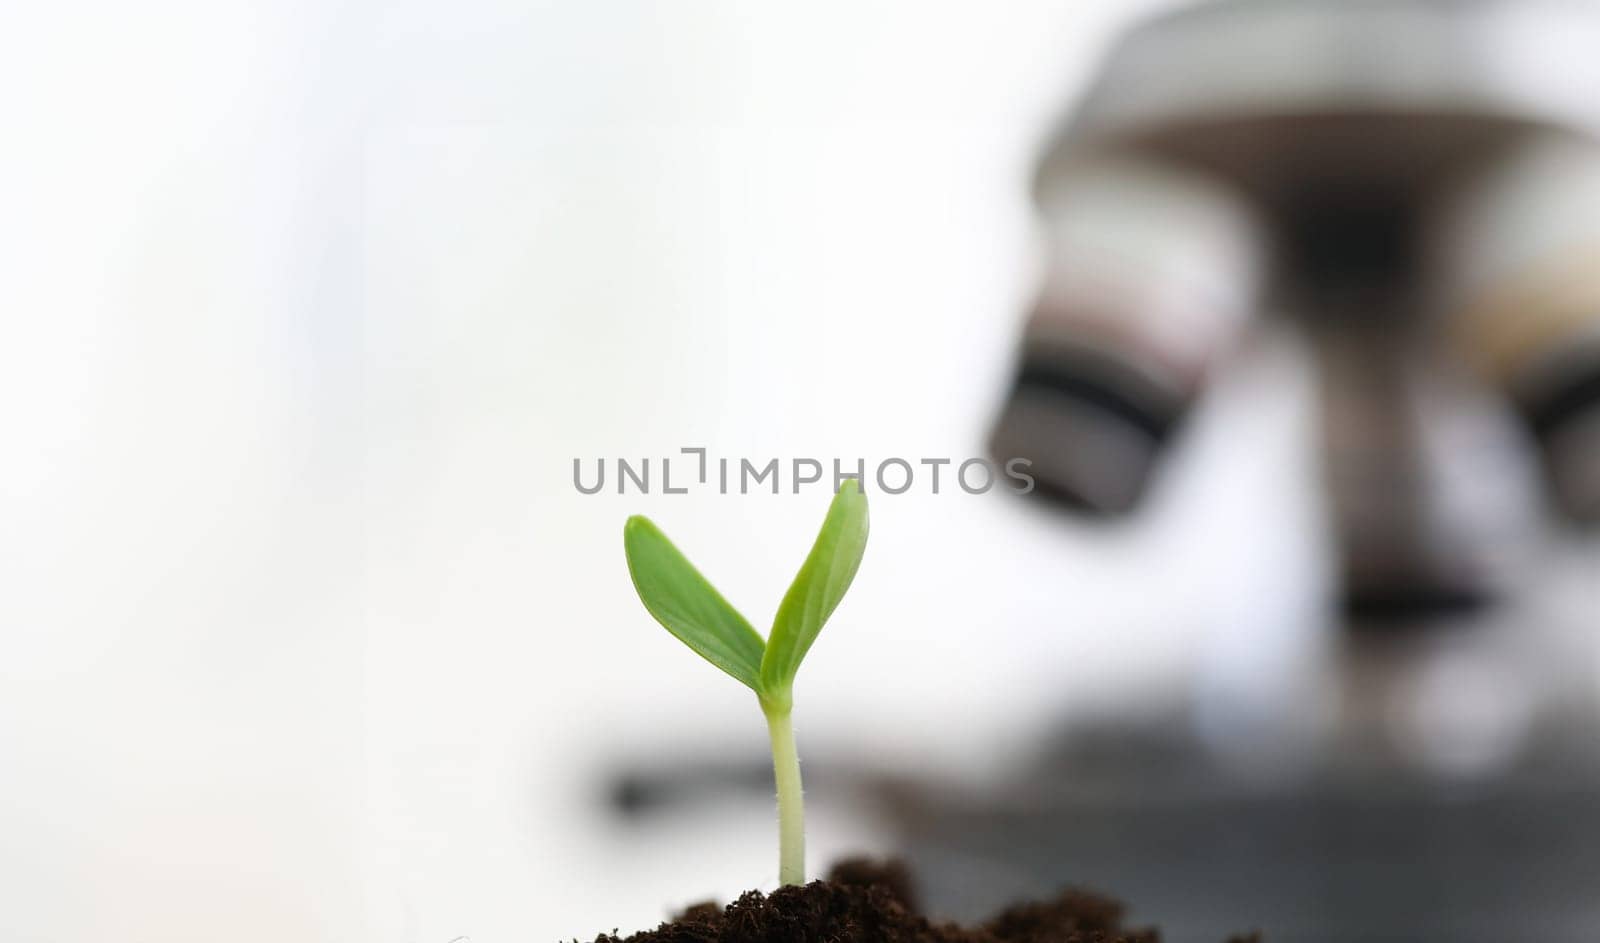 Focus on sprout growing in greenhouse conditions. Scientists exploring sprig growing out from soil. Shoot beginning new life. Botany and ecology concept